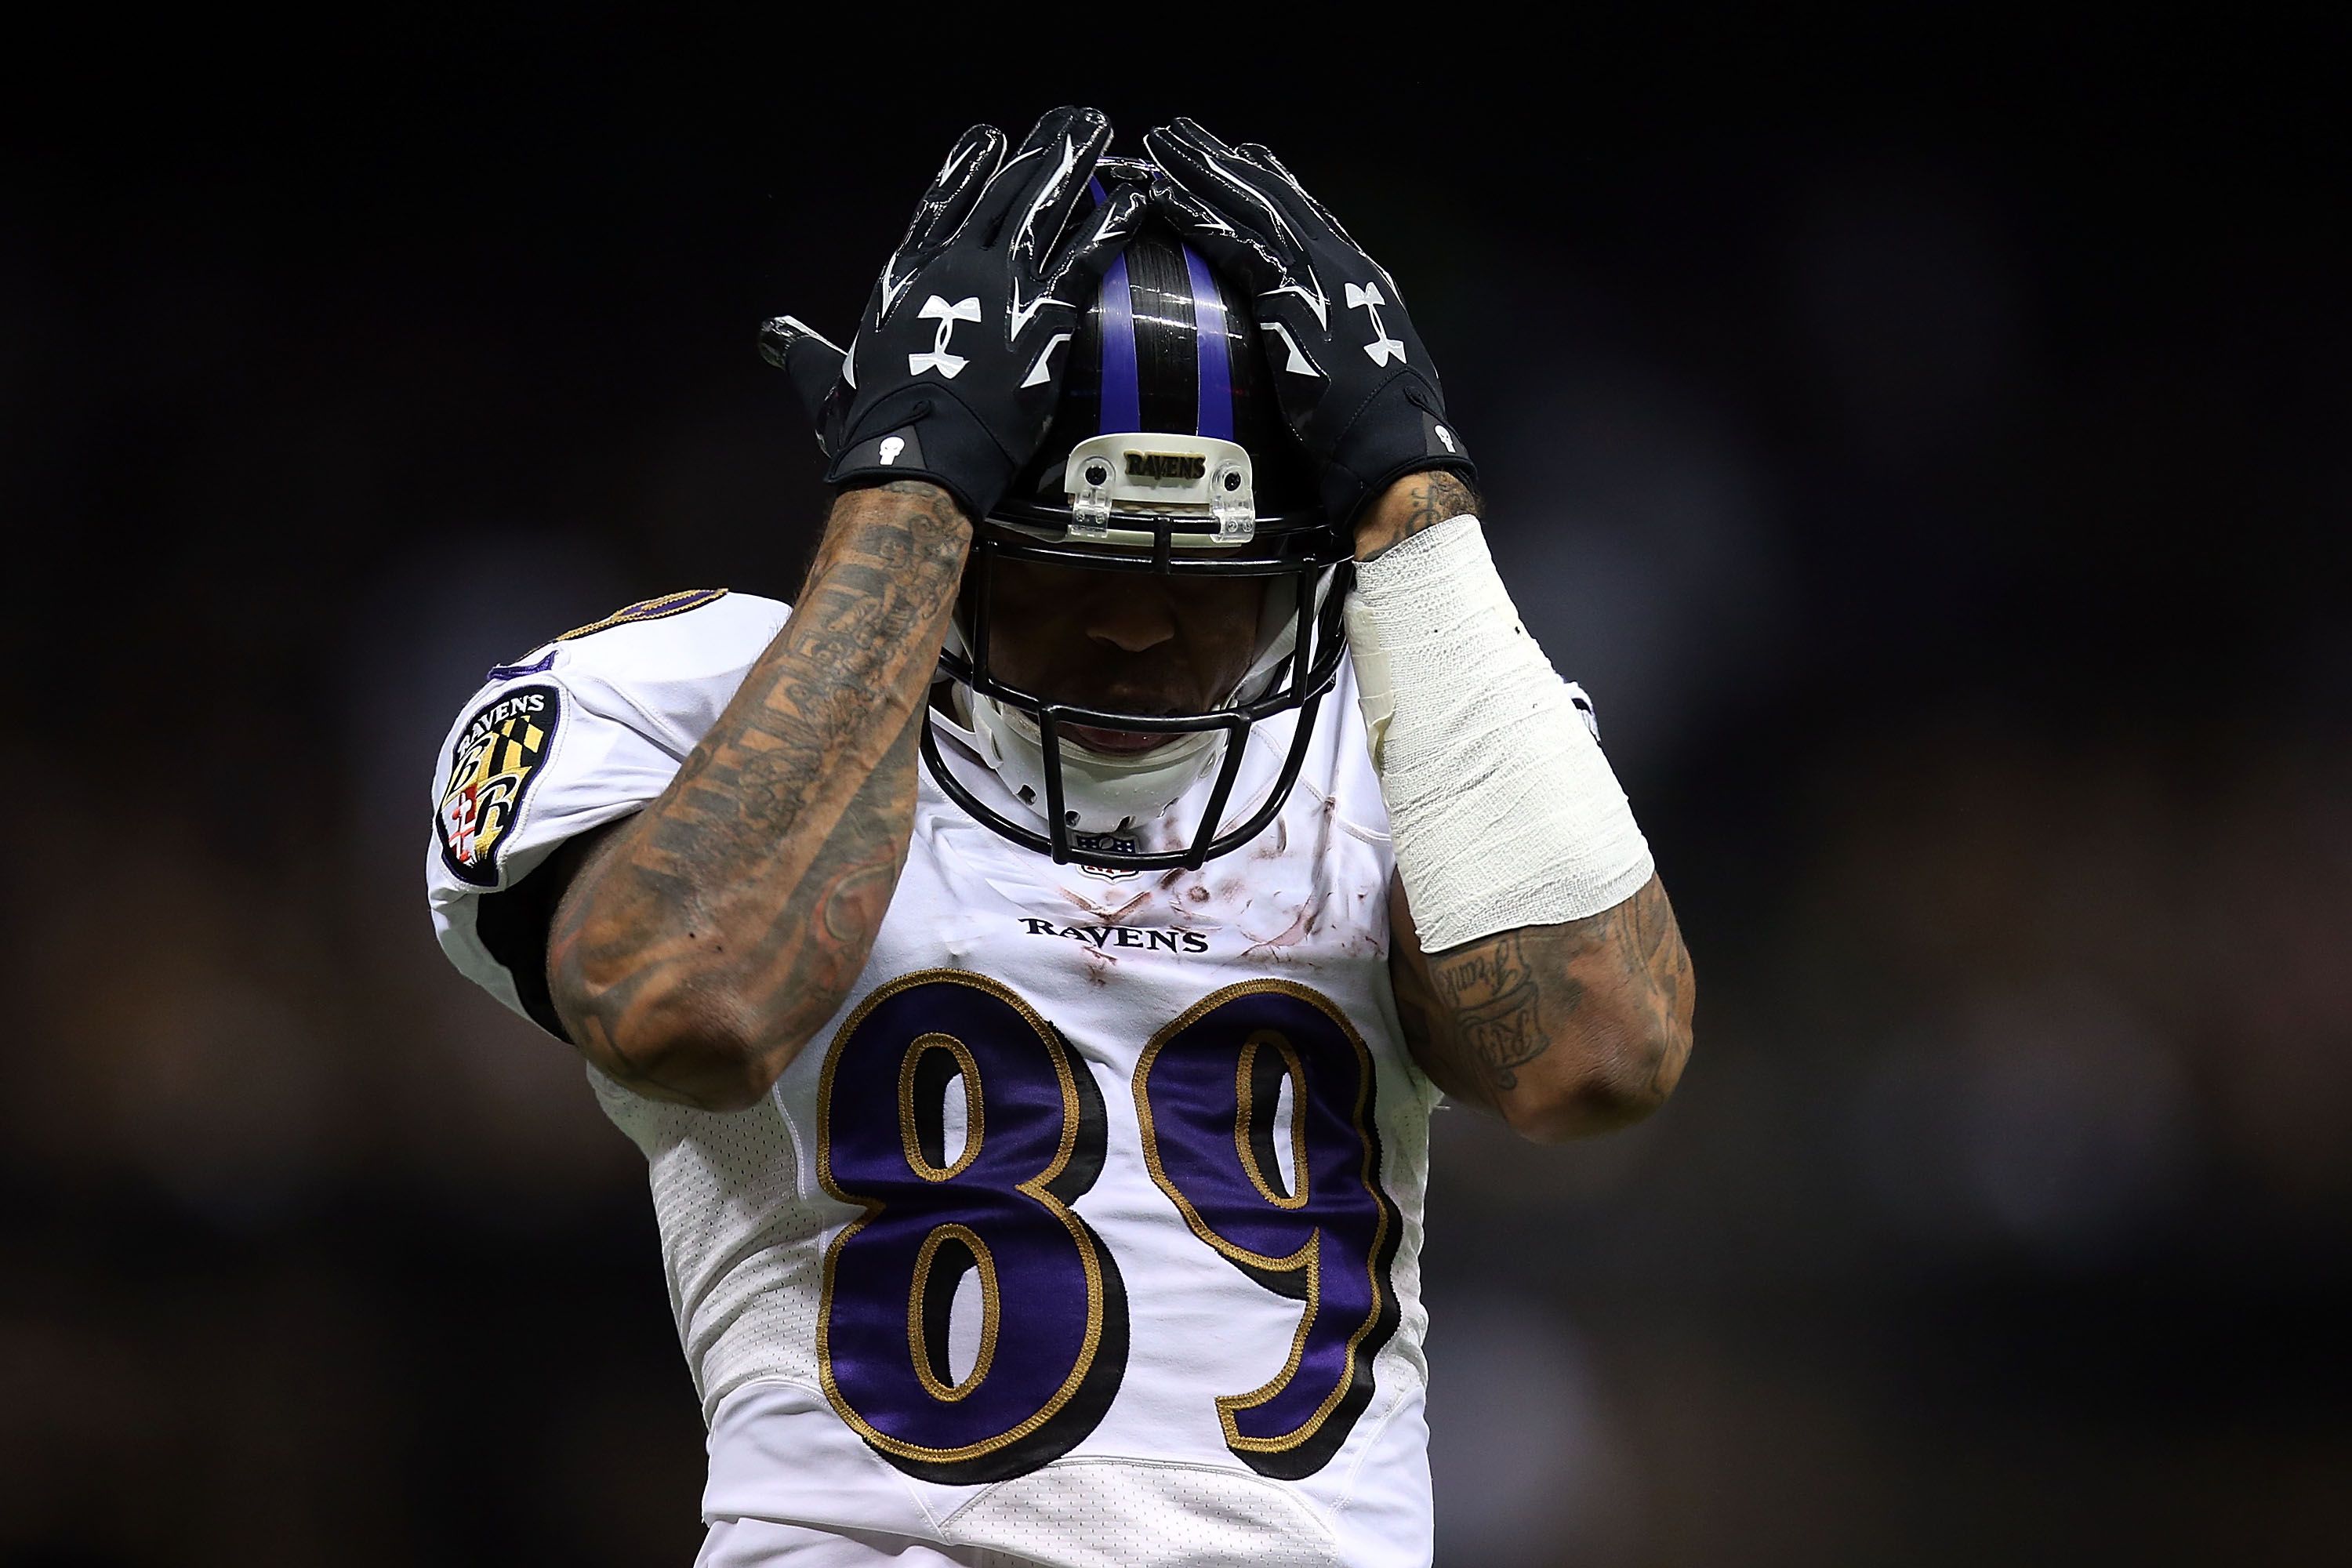 Steve Smith: I pretty much played terrible today